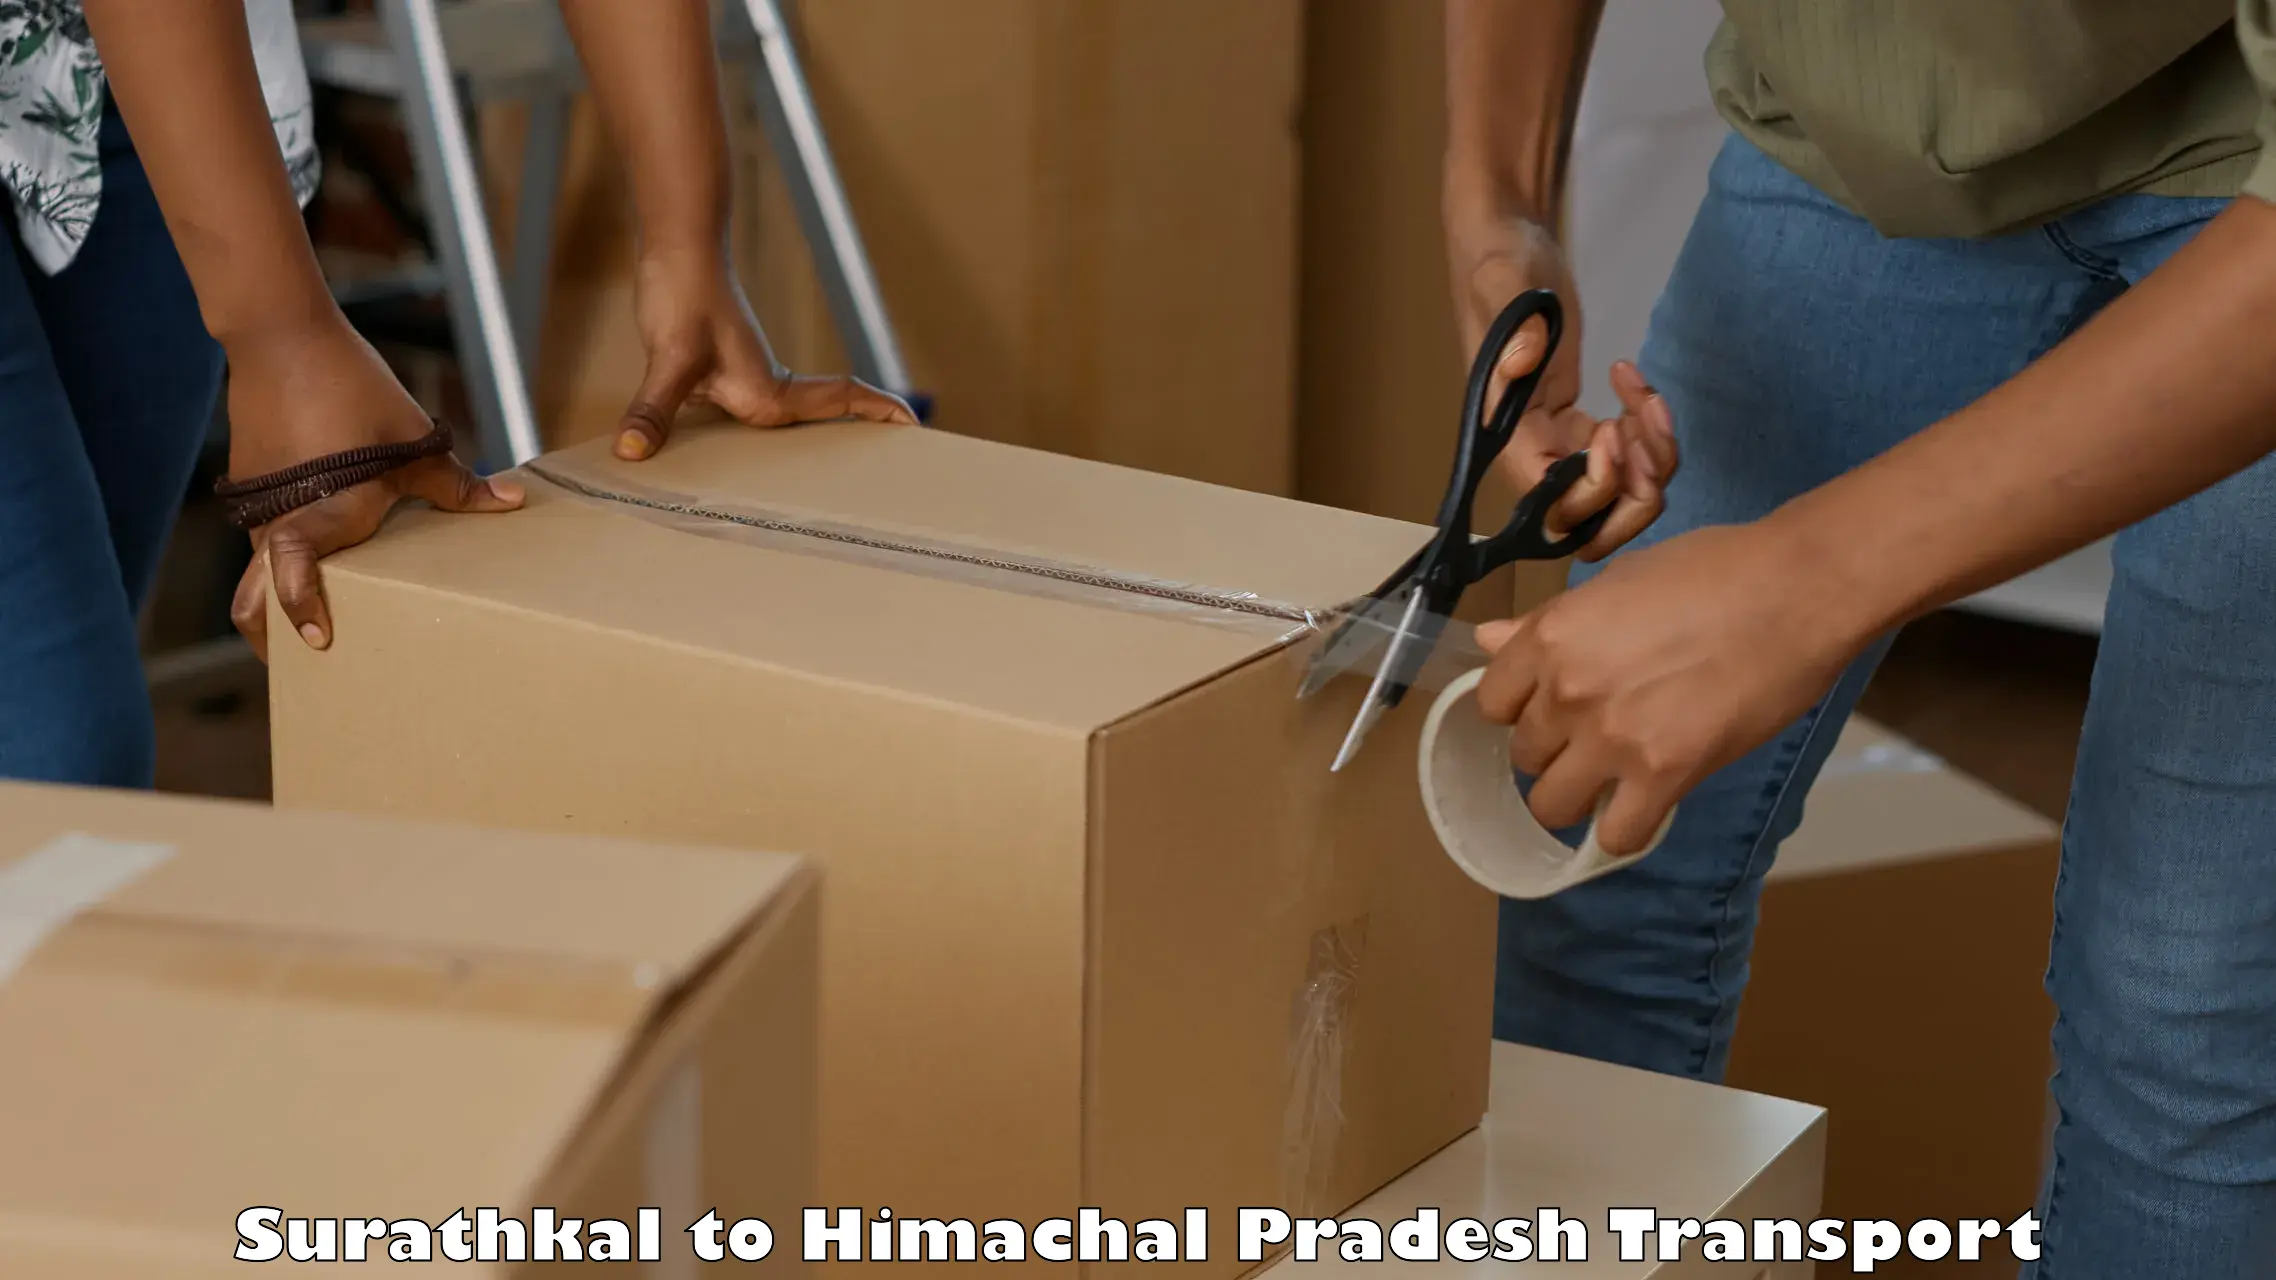 Part load transport service in India Surathkal to Nirmand